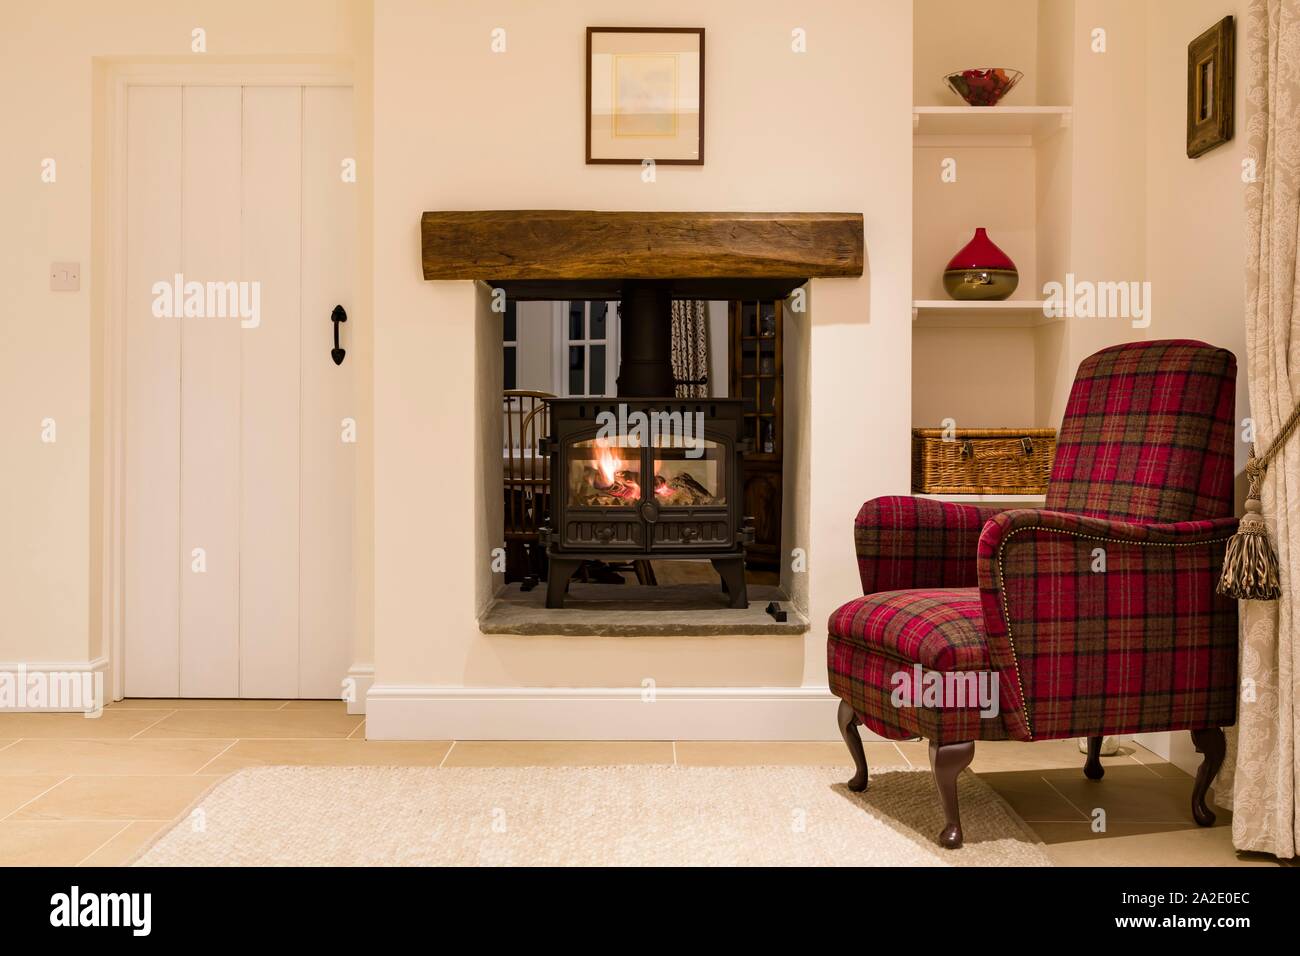 Living room interior with a wood burning stove, UK Stock Photo